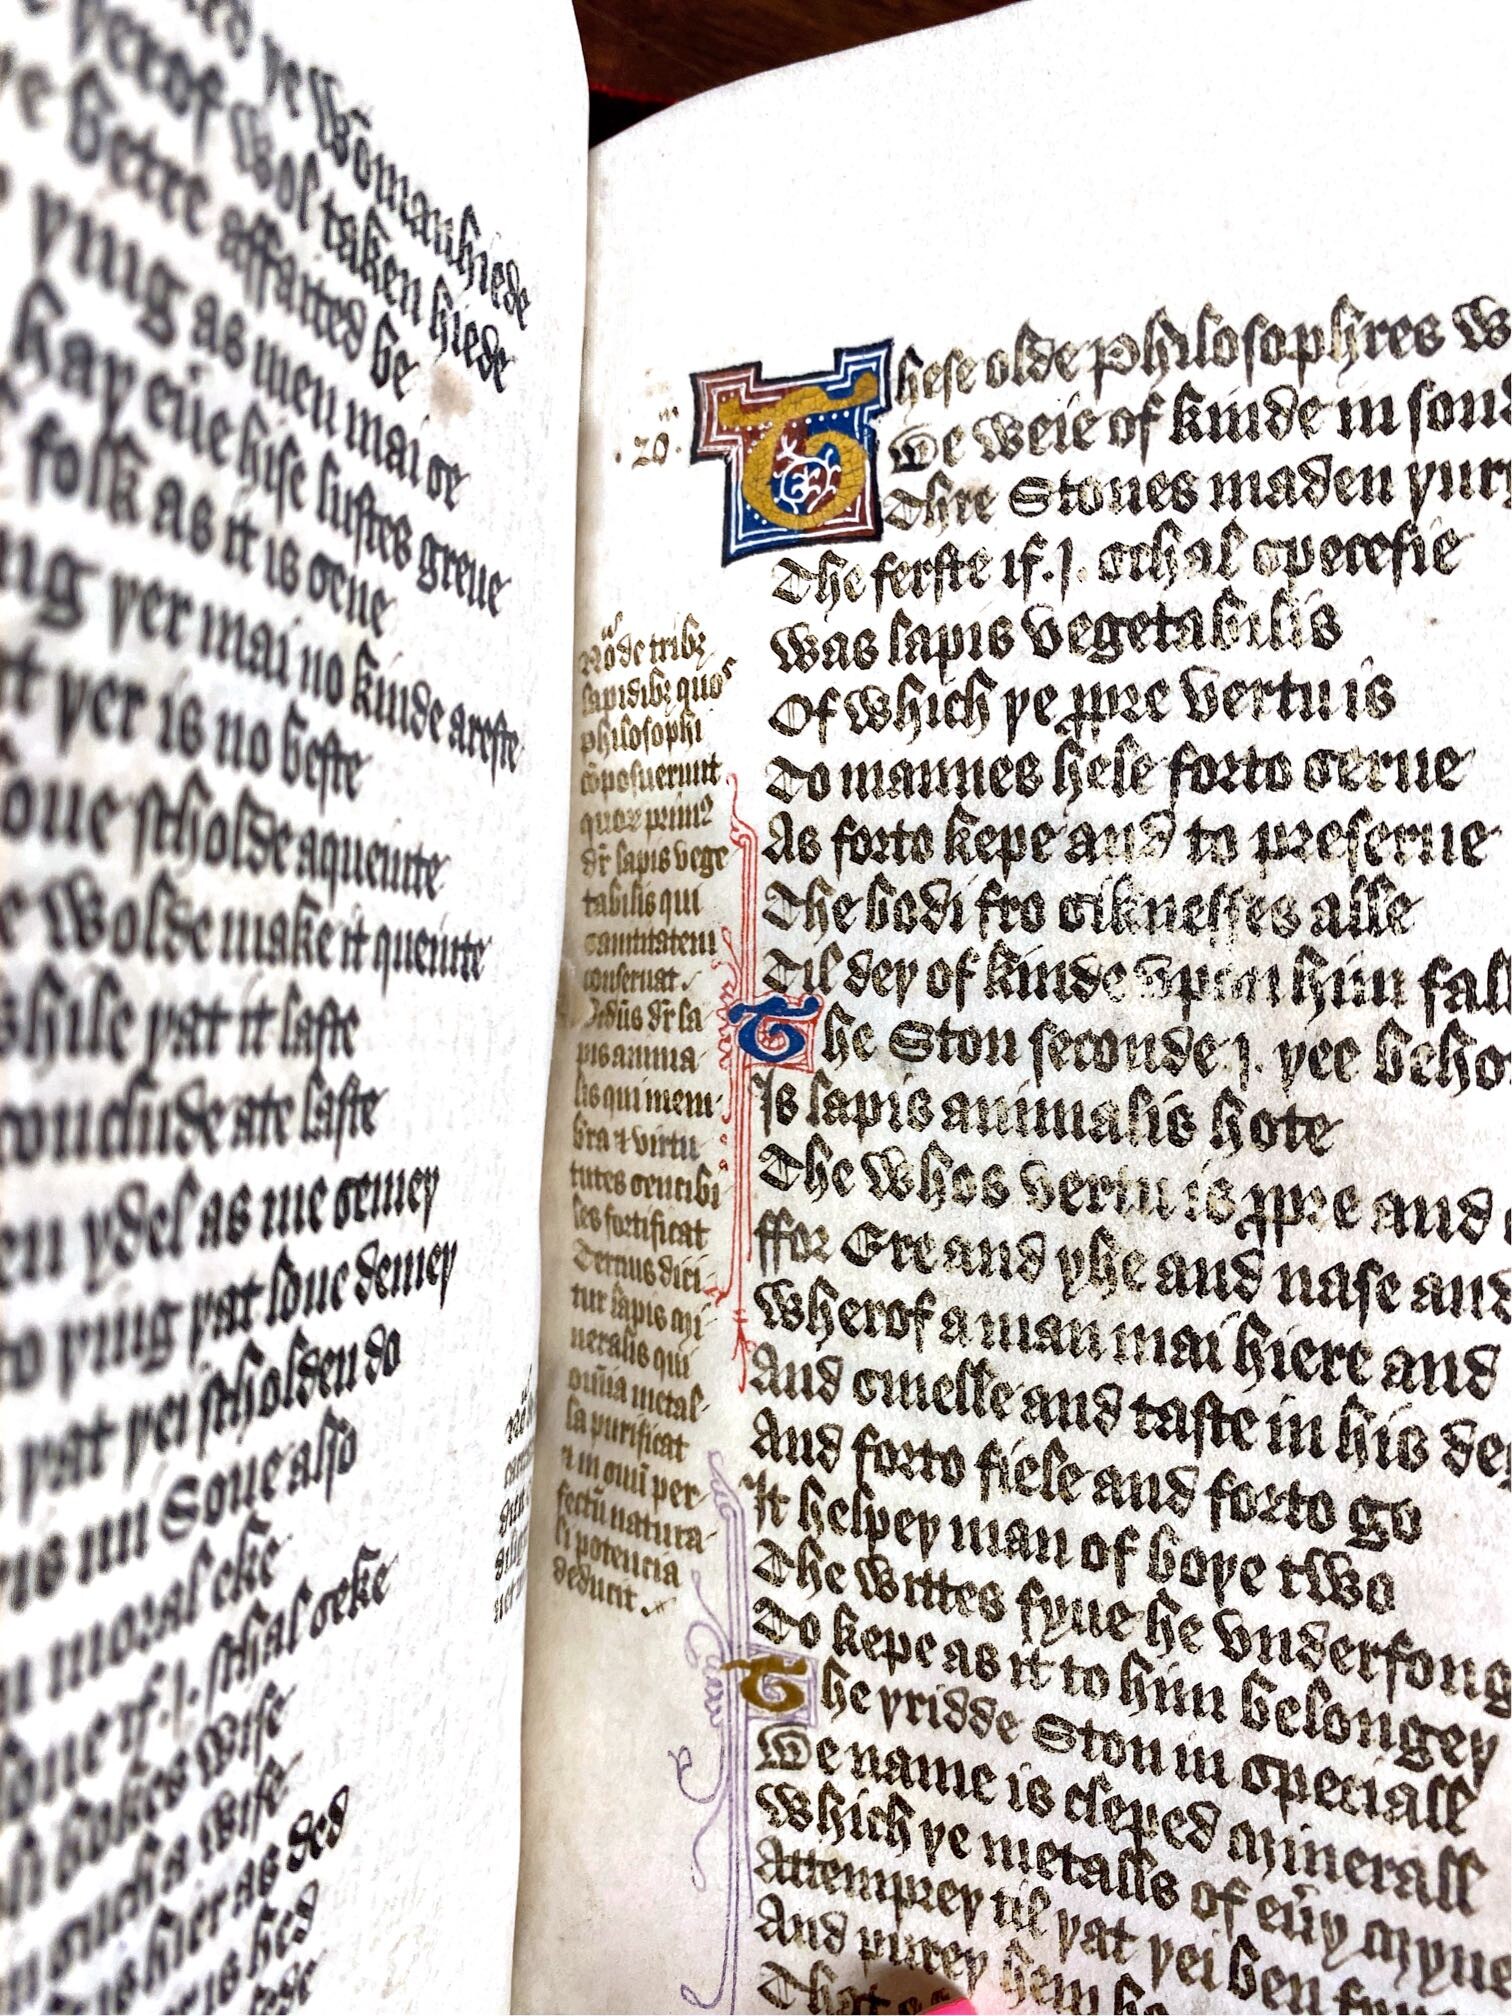 An image of an open spread of a medieval manuscript featuring two columns of text in Middle English, one each page.